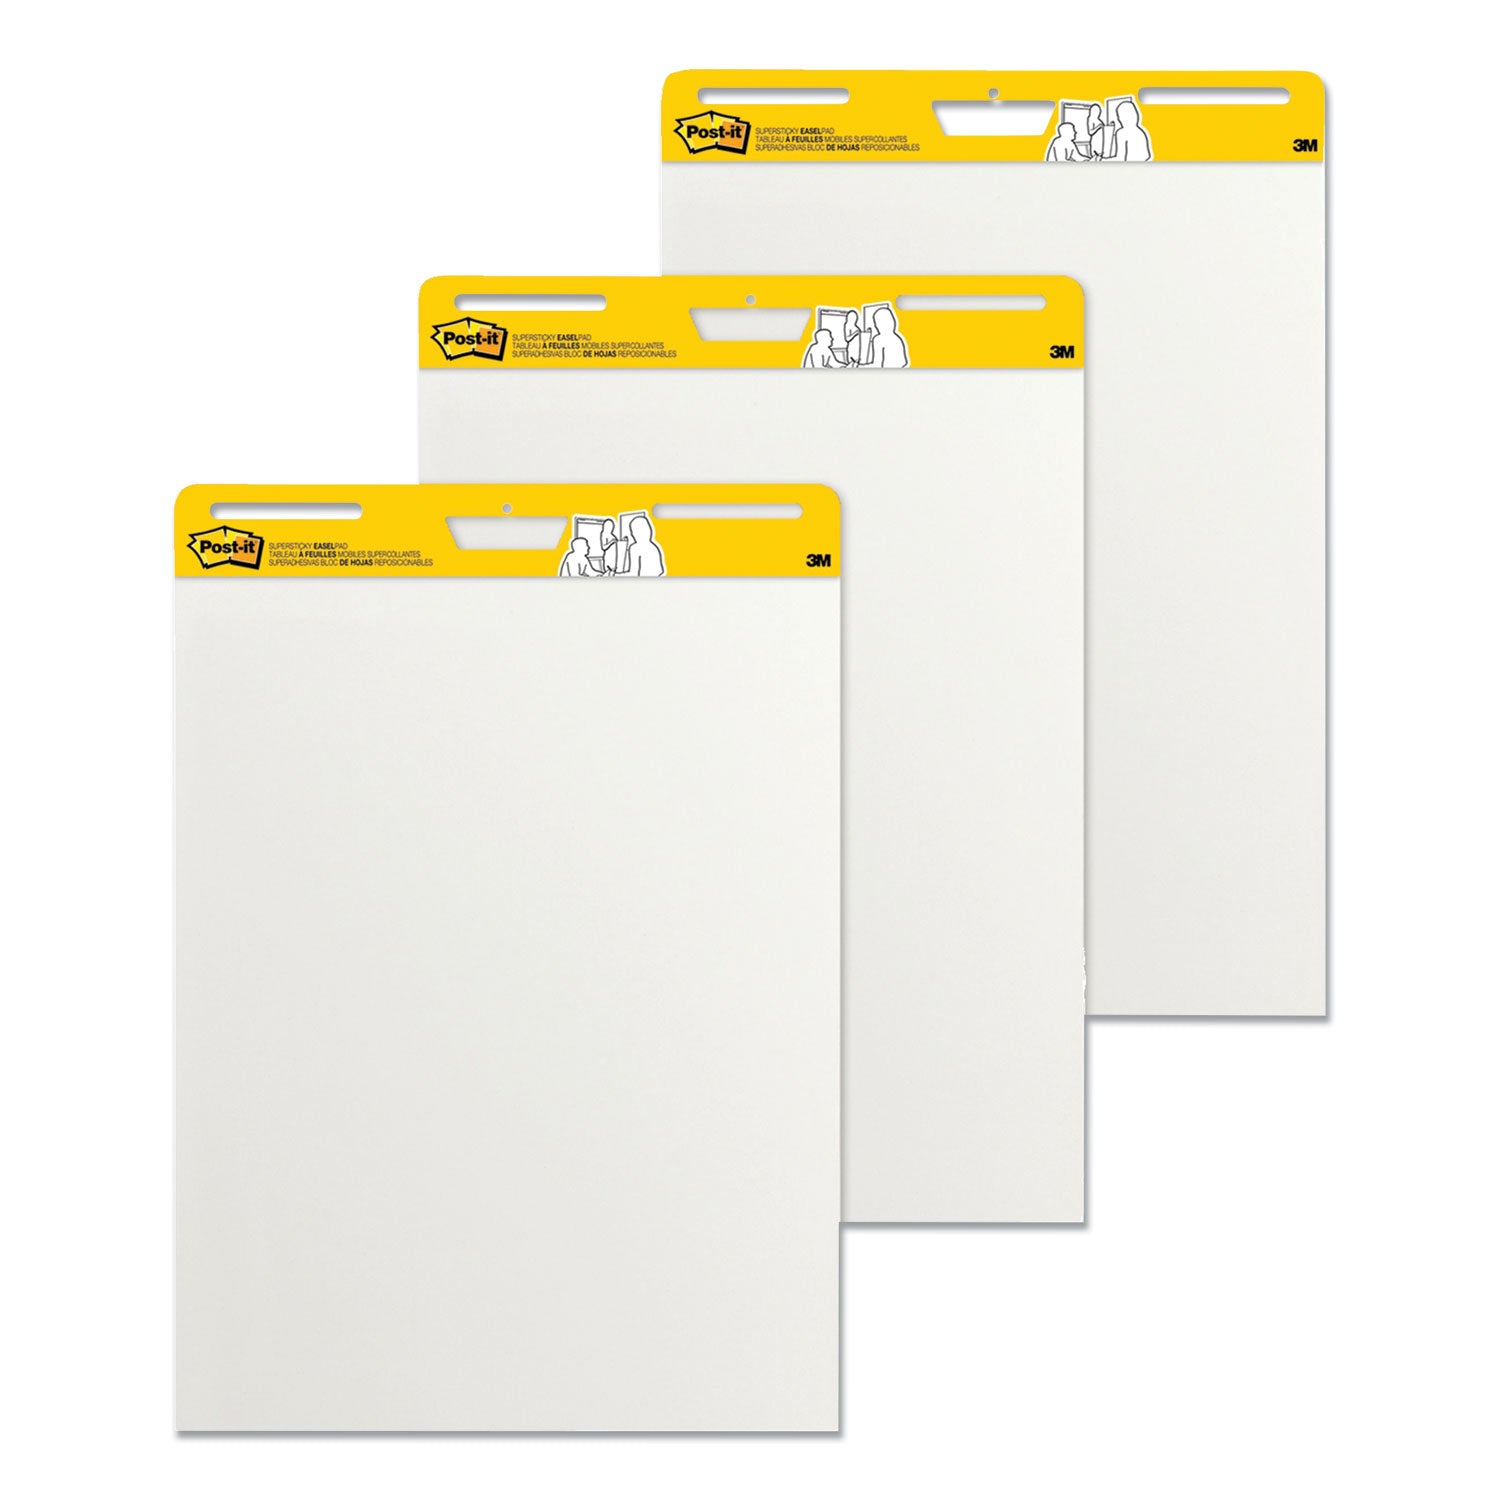 vertical-orientation-self-stick-easel-pads-unruled-25-x-30-white-30-sheets-3-pack_mmm559vad203pk - 8